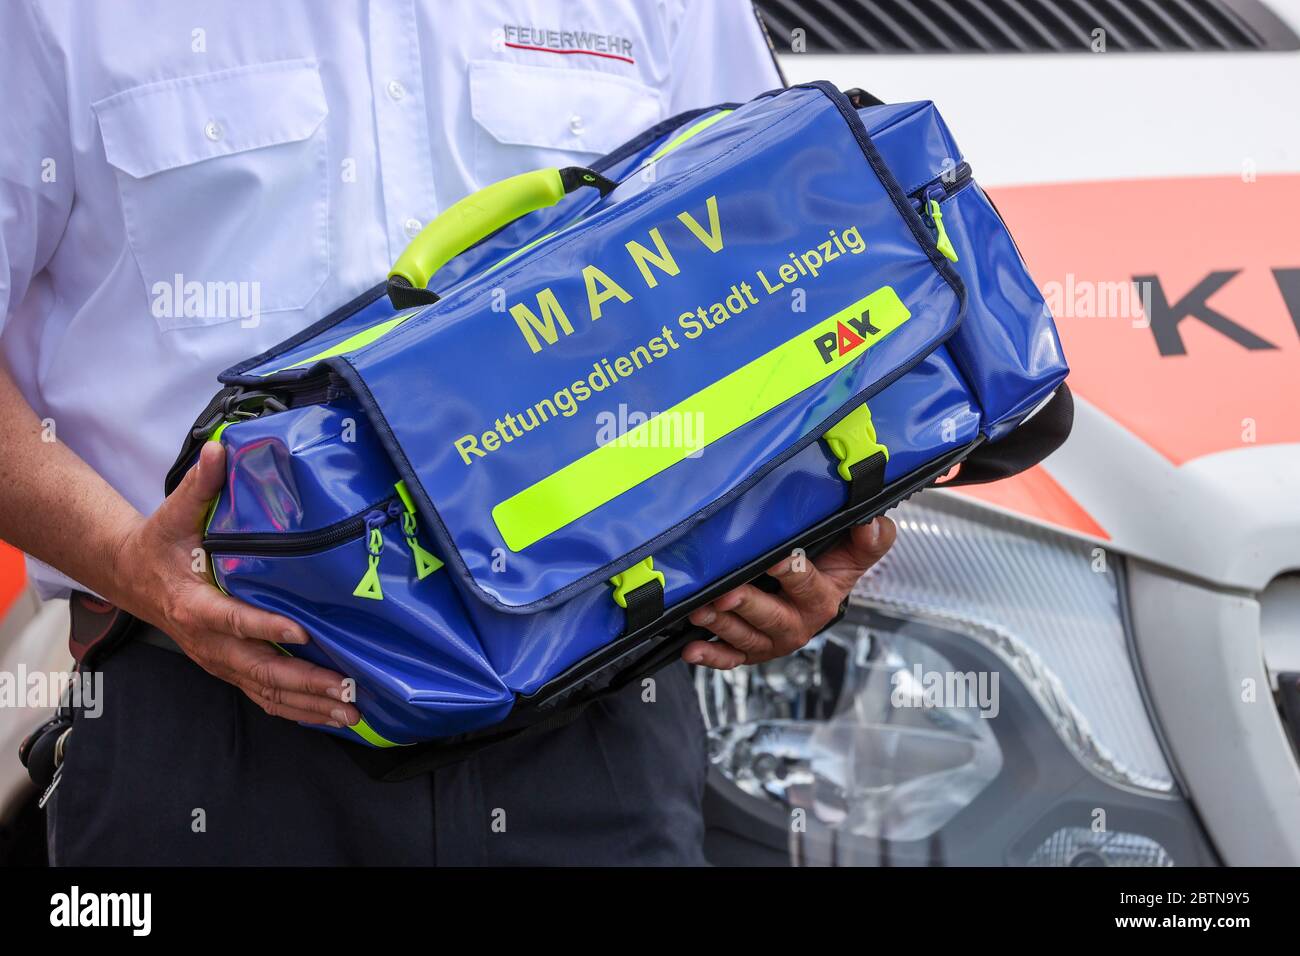 https://c8.alamy.com/comp/2BTN9Y5/27-may-2020-saxony-leipzig-a-firefighter-holds-a-special-bag-for-so-called-mass-casualty-and-illness-incidents-manv-in-front-of-an-ambulance-inside-the-bag-are-among-other-things-special-bandages-for-stopping-bleeding-in-the-event-of-serious-external-and-internal-injuries-as-well-as-markings-for-those-injured-to-varying-degrees-in-a-mass-casualty-incident-there-are-initially-only-a-few-rescue-teams-facing-a-large-number-of-injured-persons-the-survival-of-as-many-patients-as-possible-can-be-ensured-by-sorting-out-and-marking-the-different-degrees-of-injury-and-then-organising-trea-2BTN9Y5.jpg